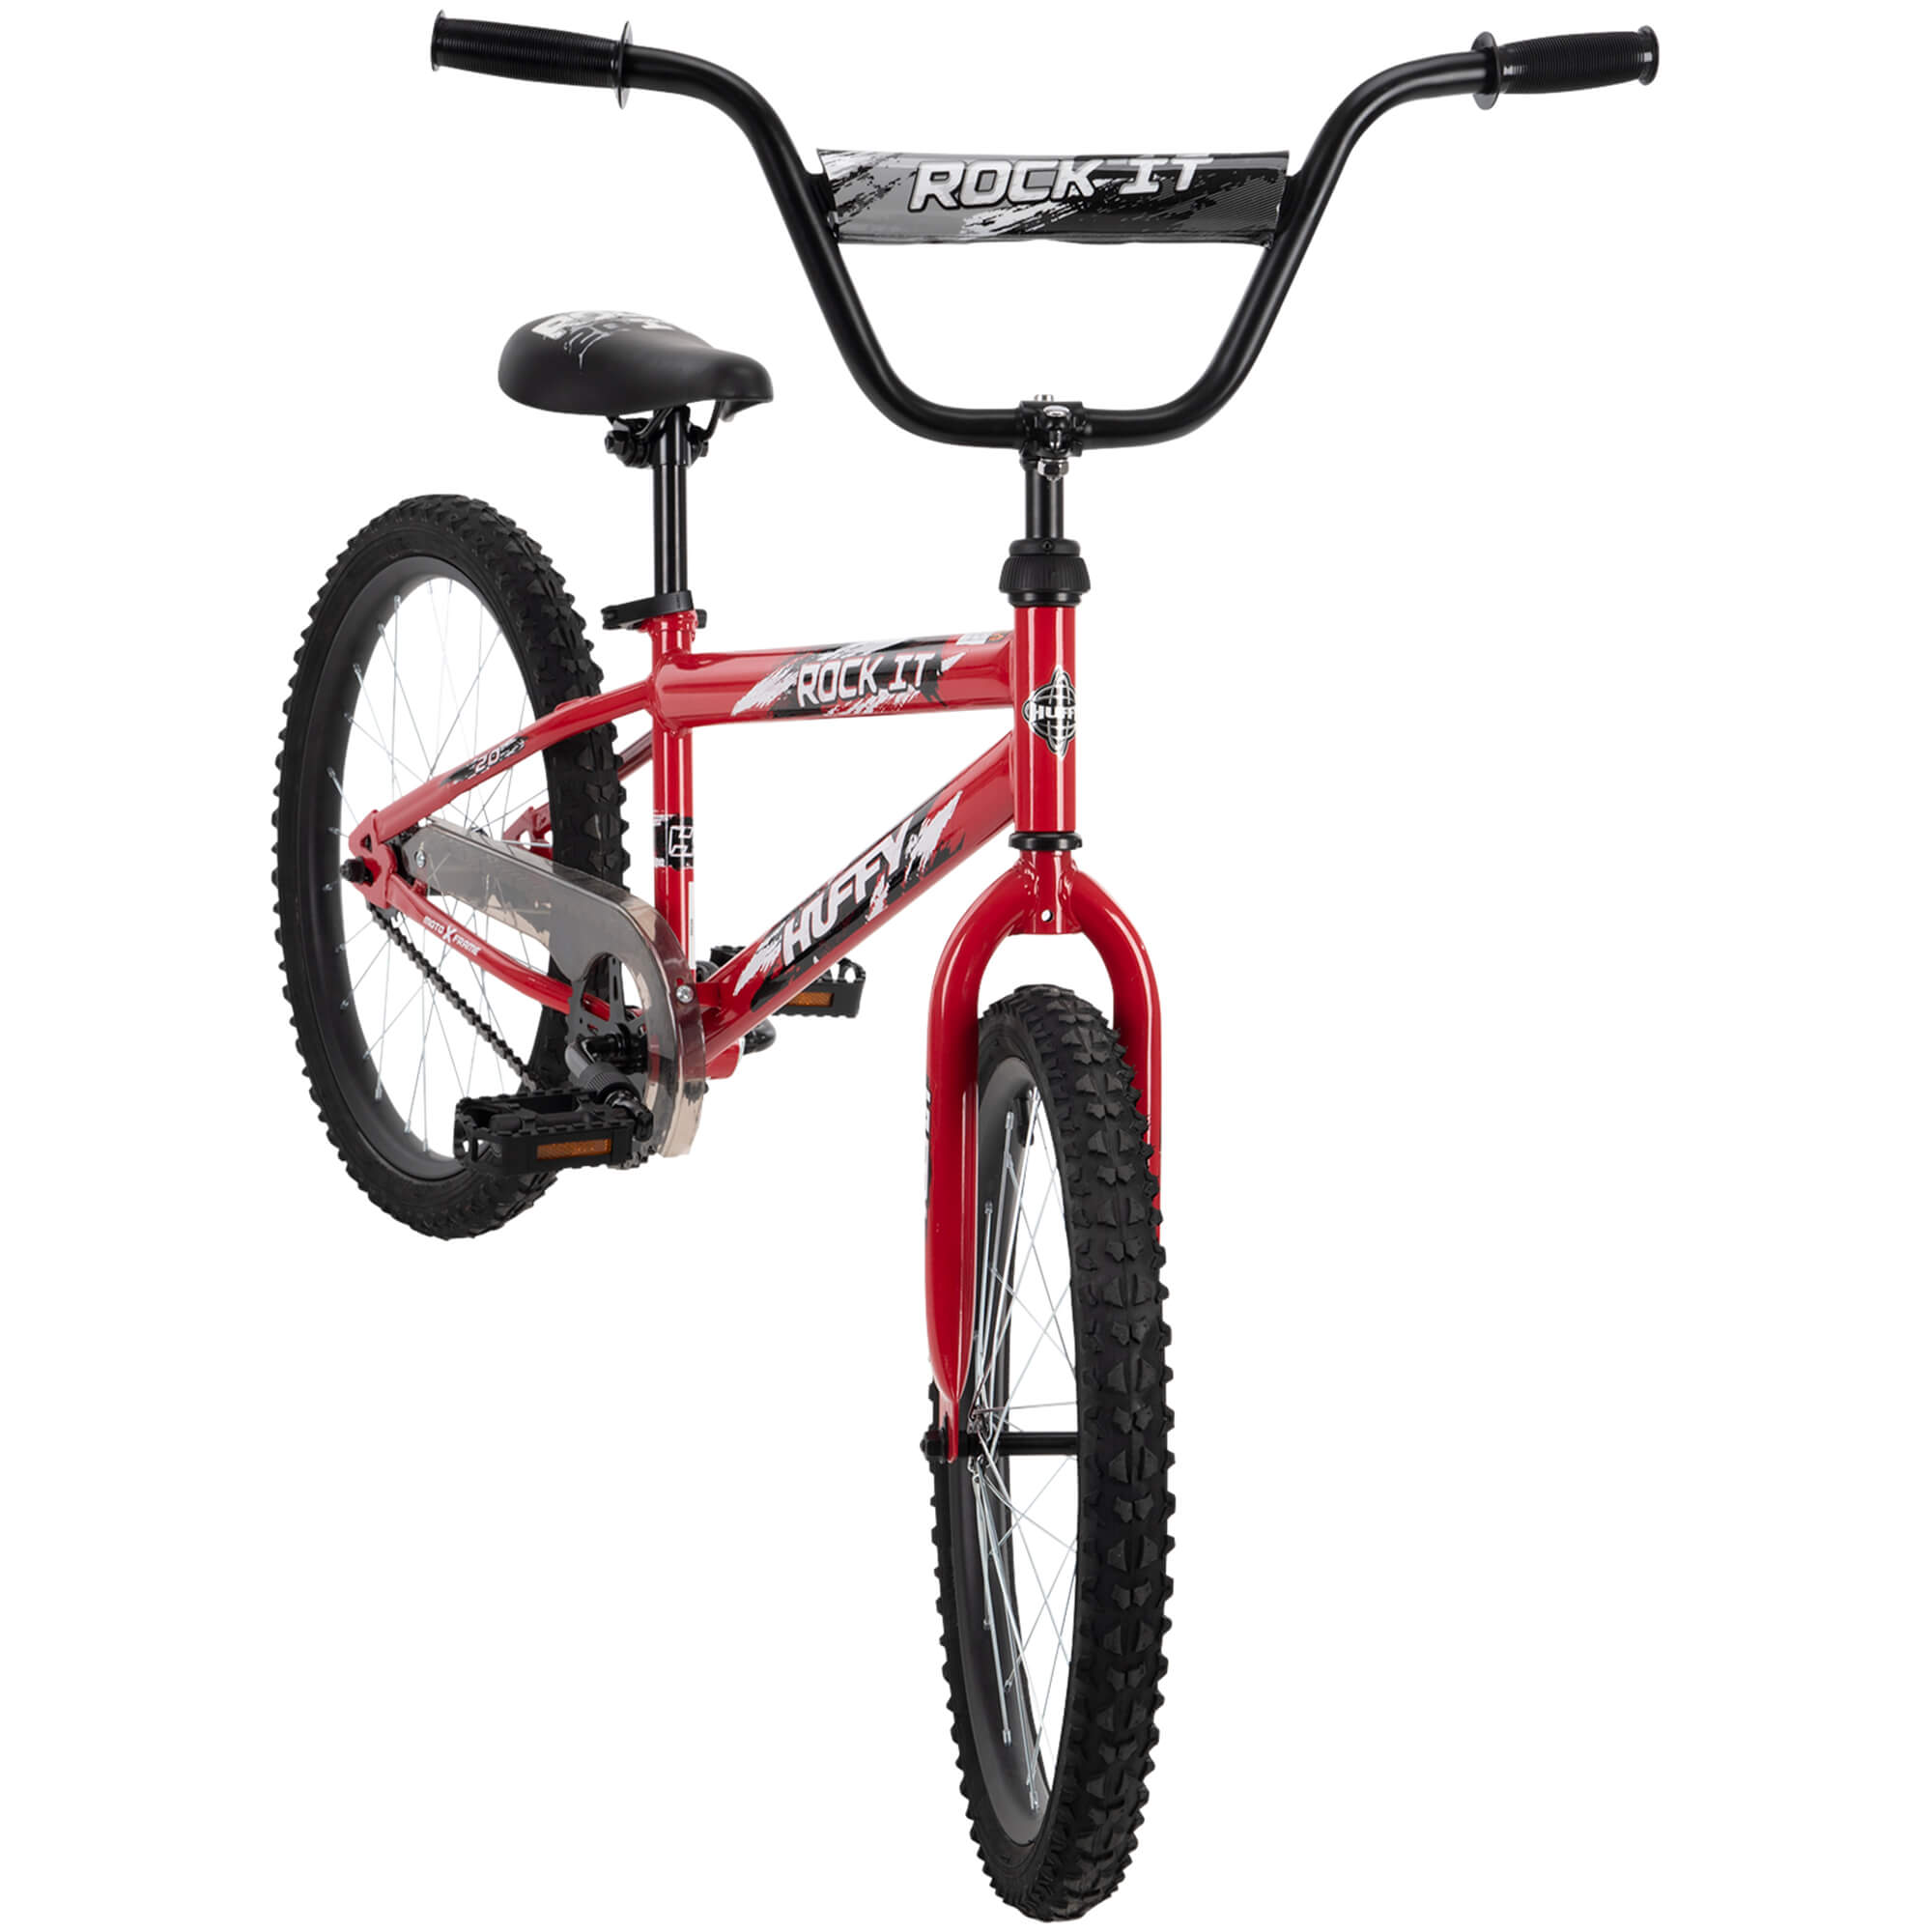 Huffy 20" Rock It Kids Bike for Boys, Hot Red - image 2 of 8